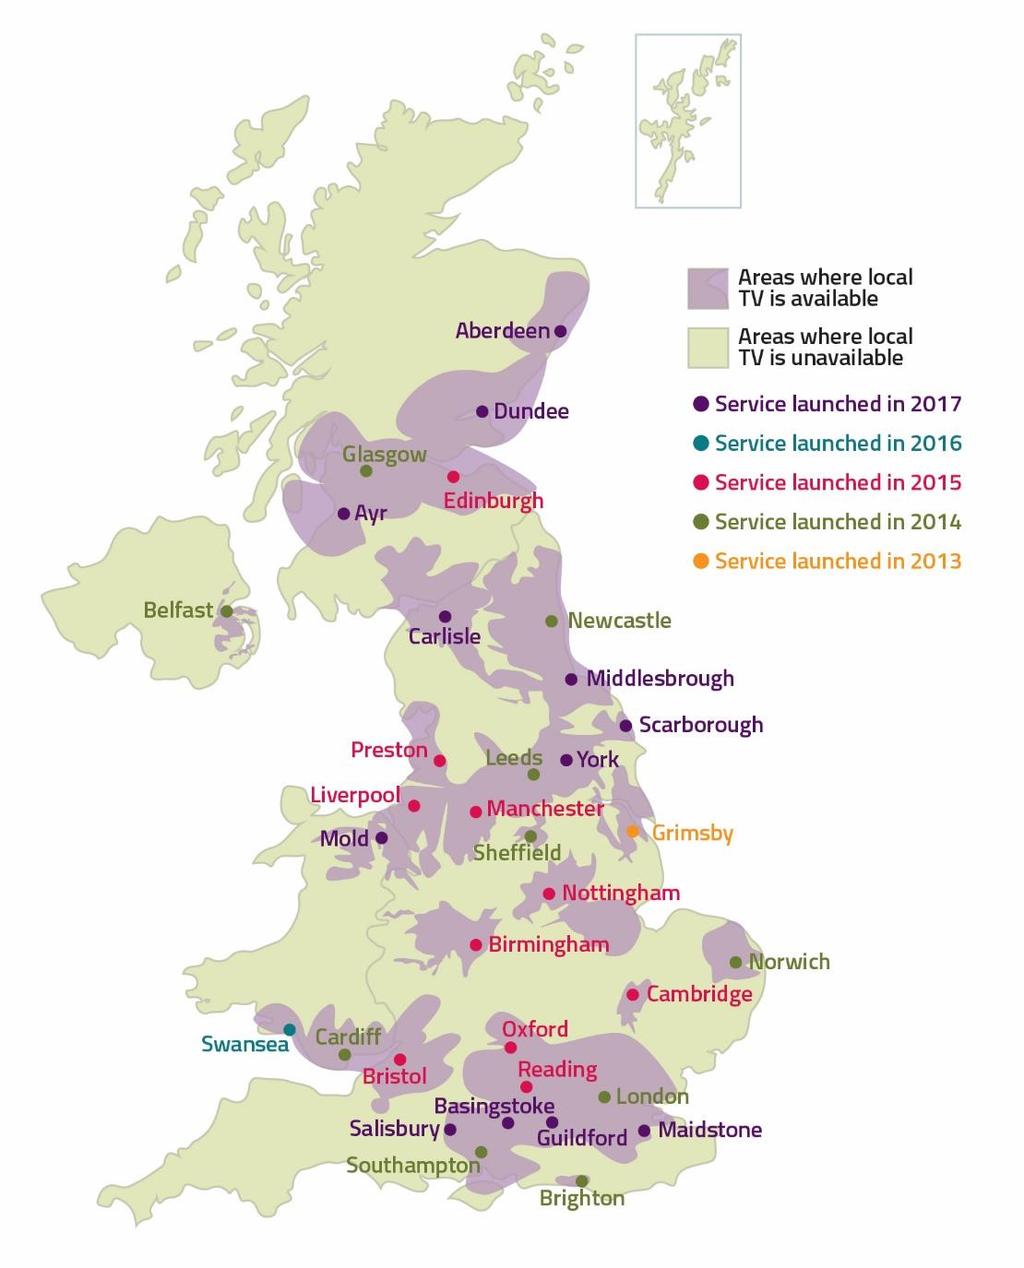 Figure 43: Map of local TV stations across the UK and their coverage Source: Ofcom/broadcasters In 2017, an average of 1.